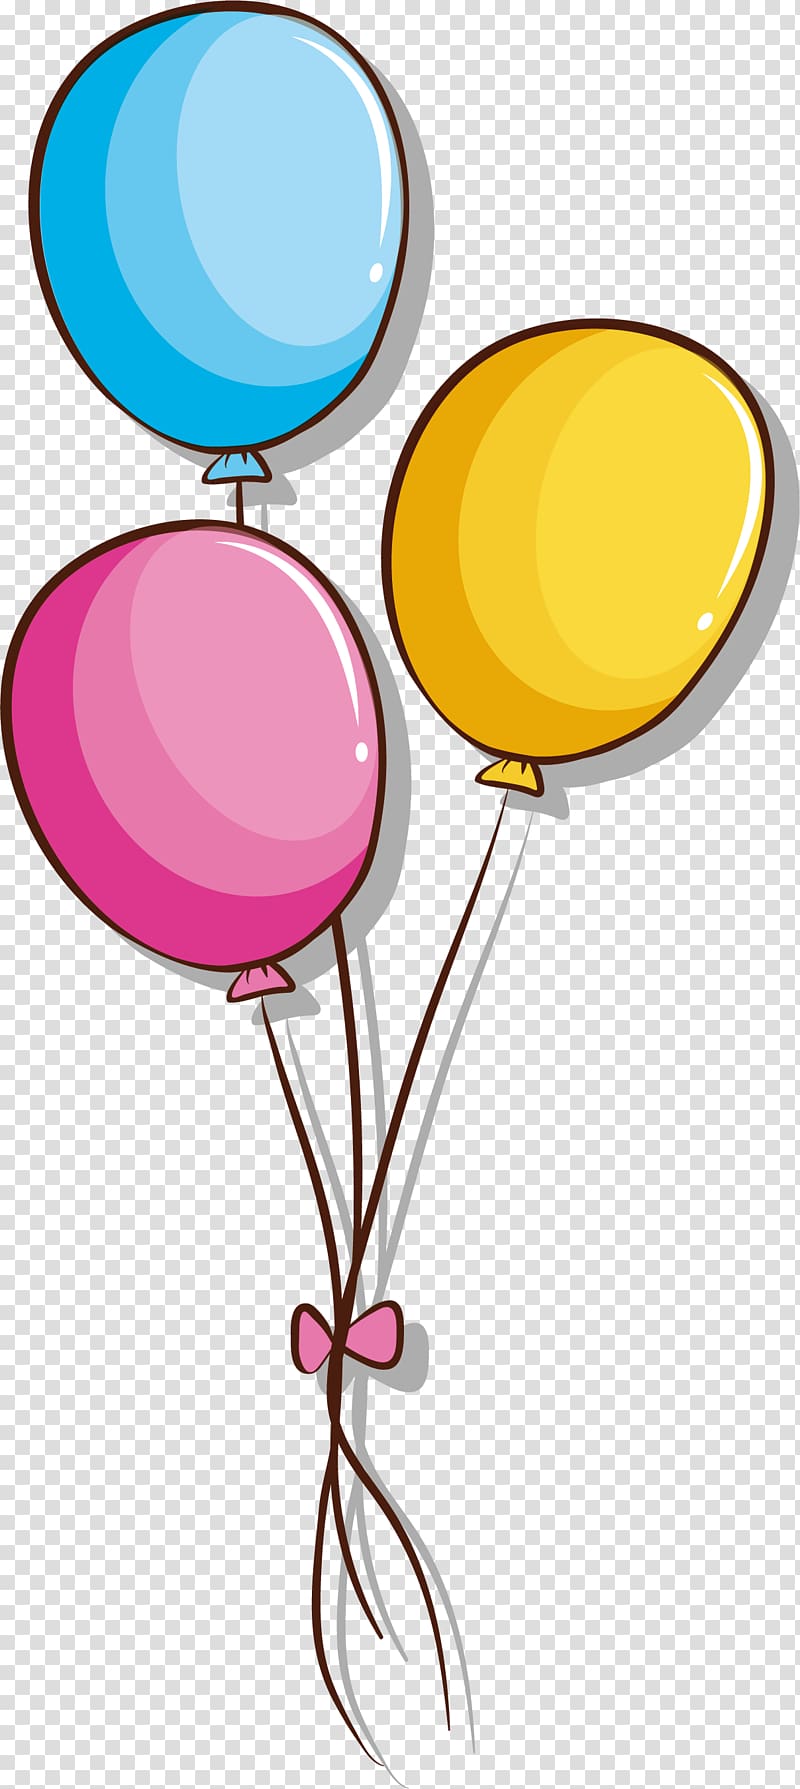 Drawing Toy balloon Illustration, A bunch of colored balloons transparent background PNG clipart